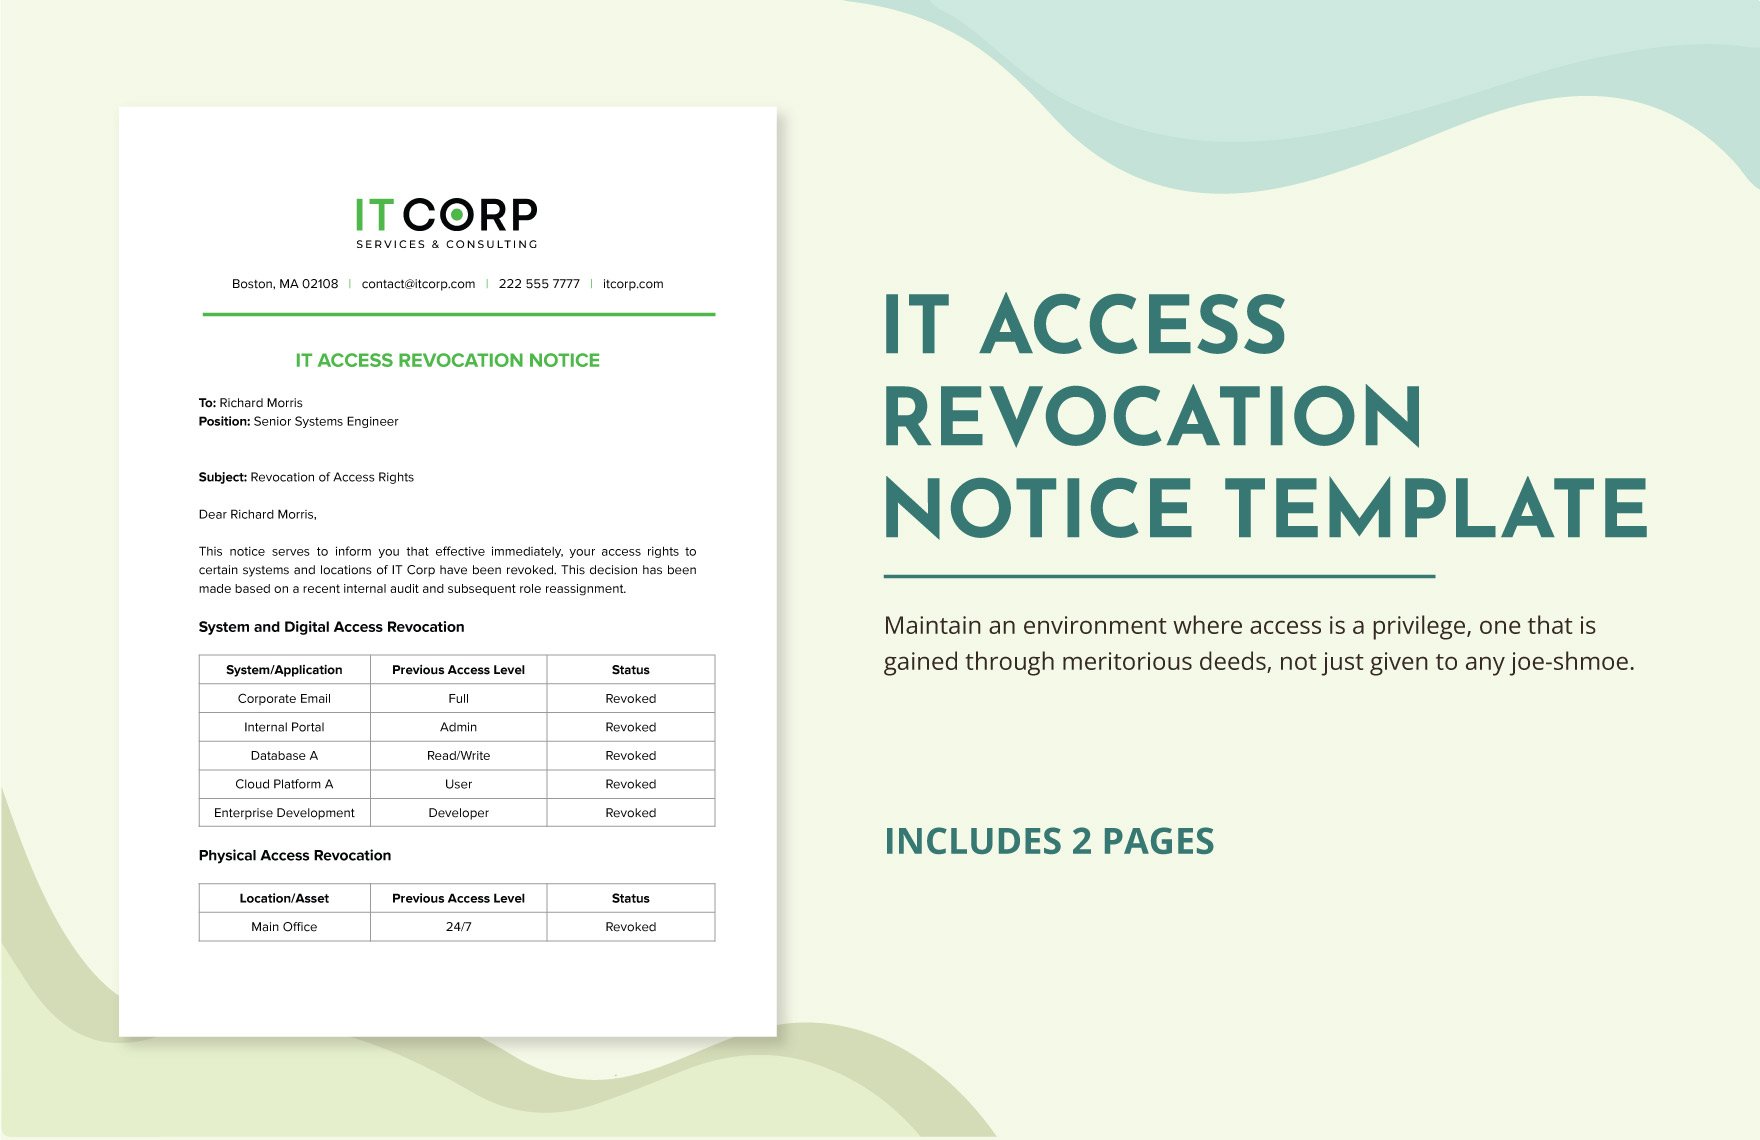 IT Access Revocation Notice Template in Word, Google Docs, PDF